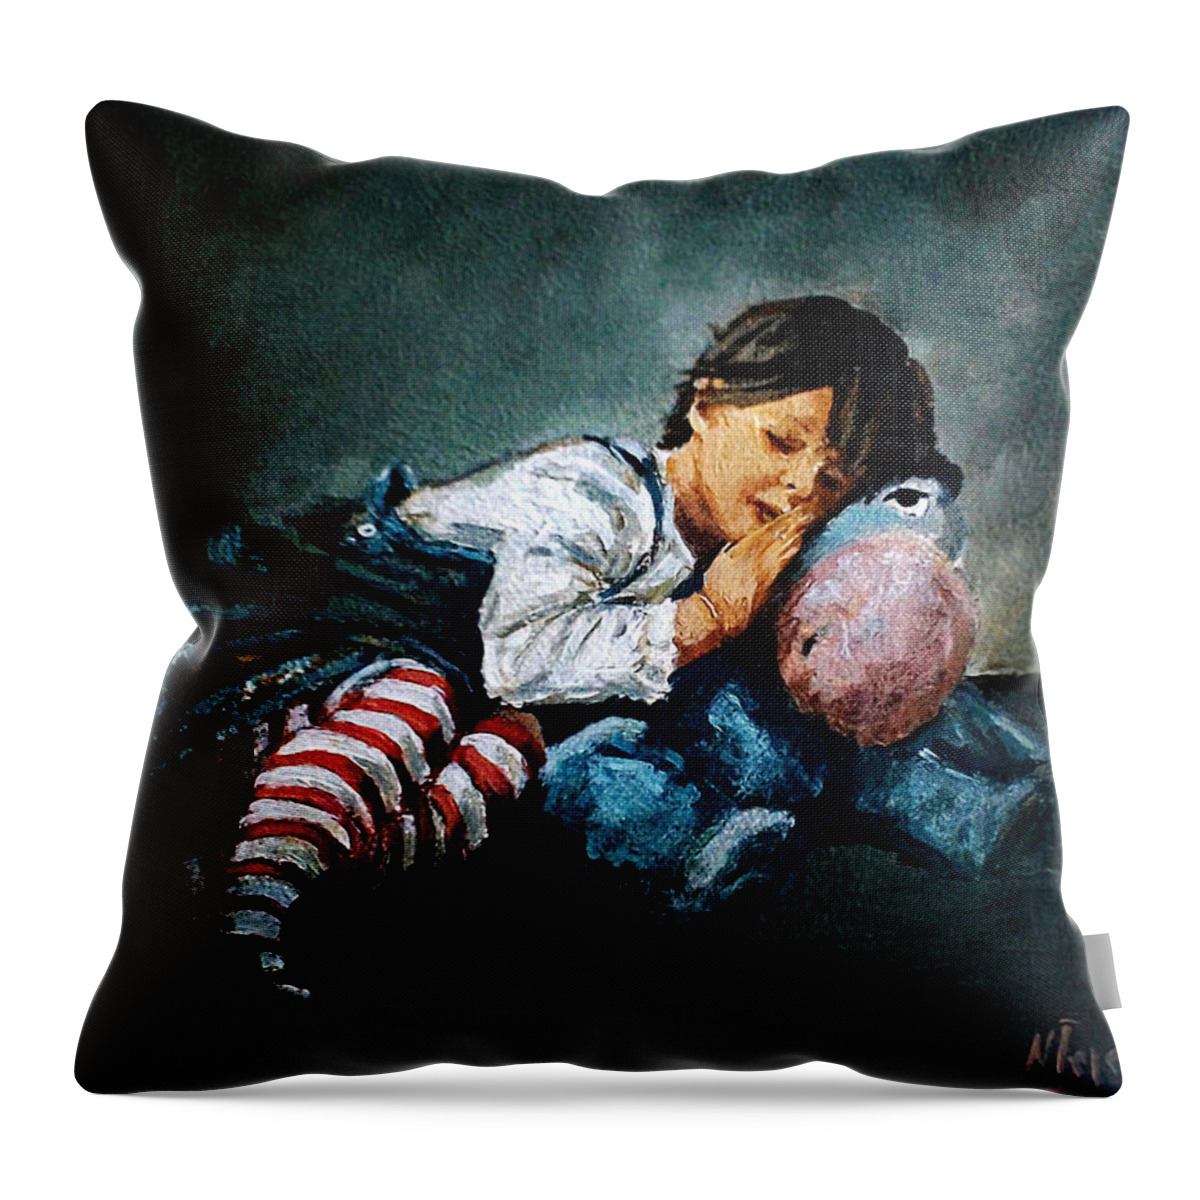  Throw Pillow featuring the painting Christmas present by Natalia Tejera